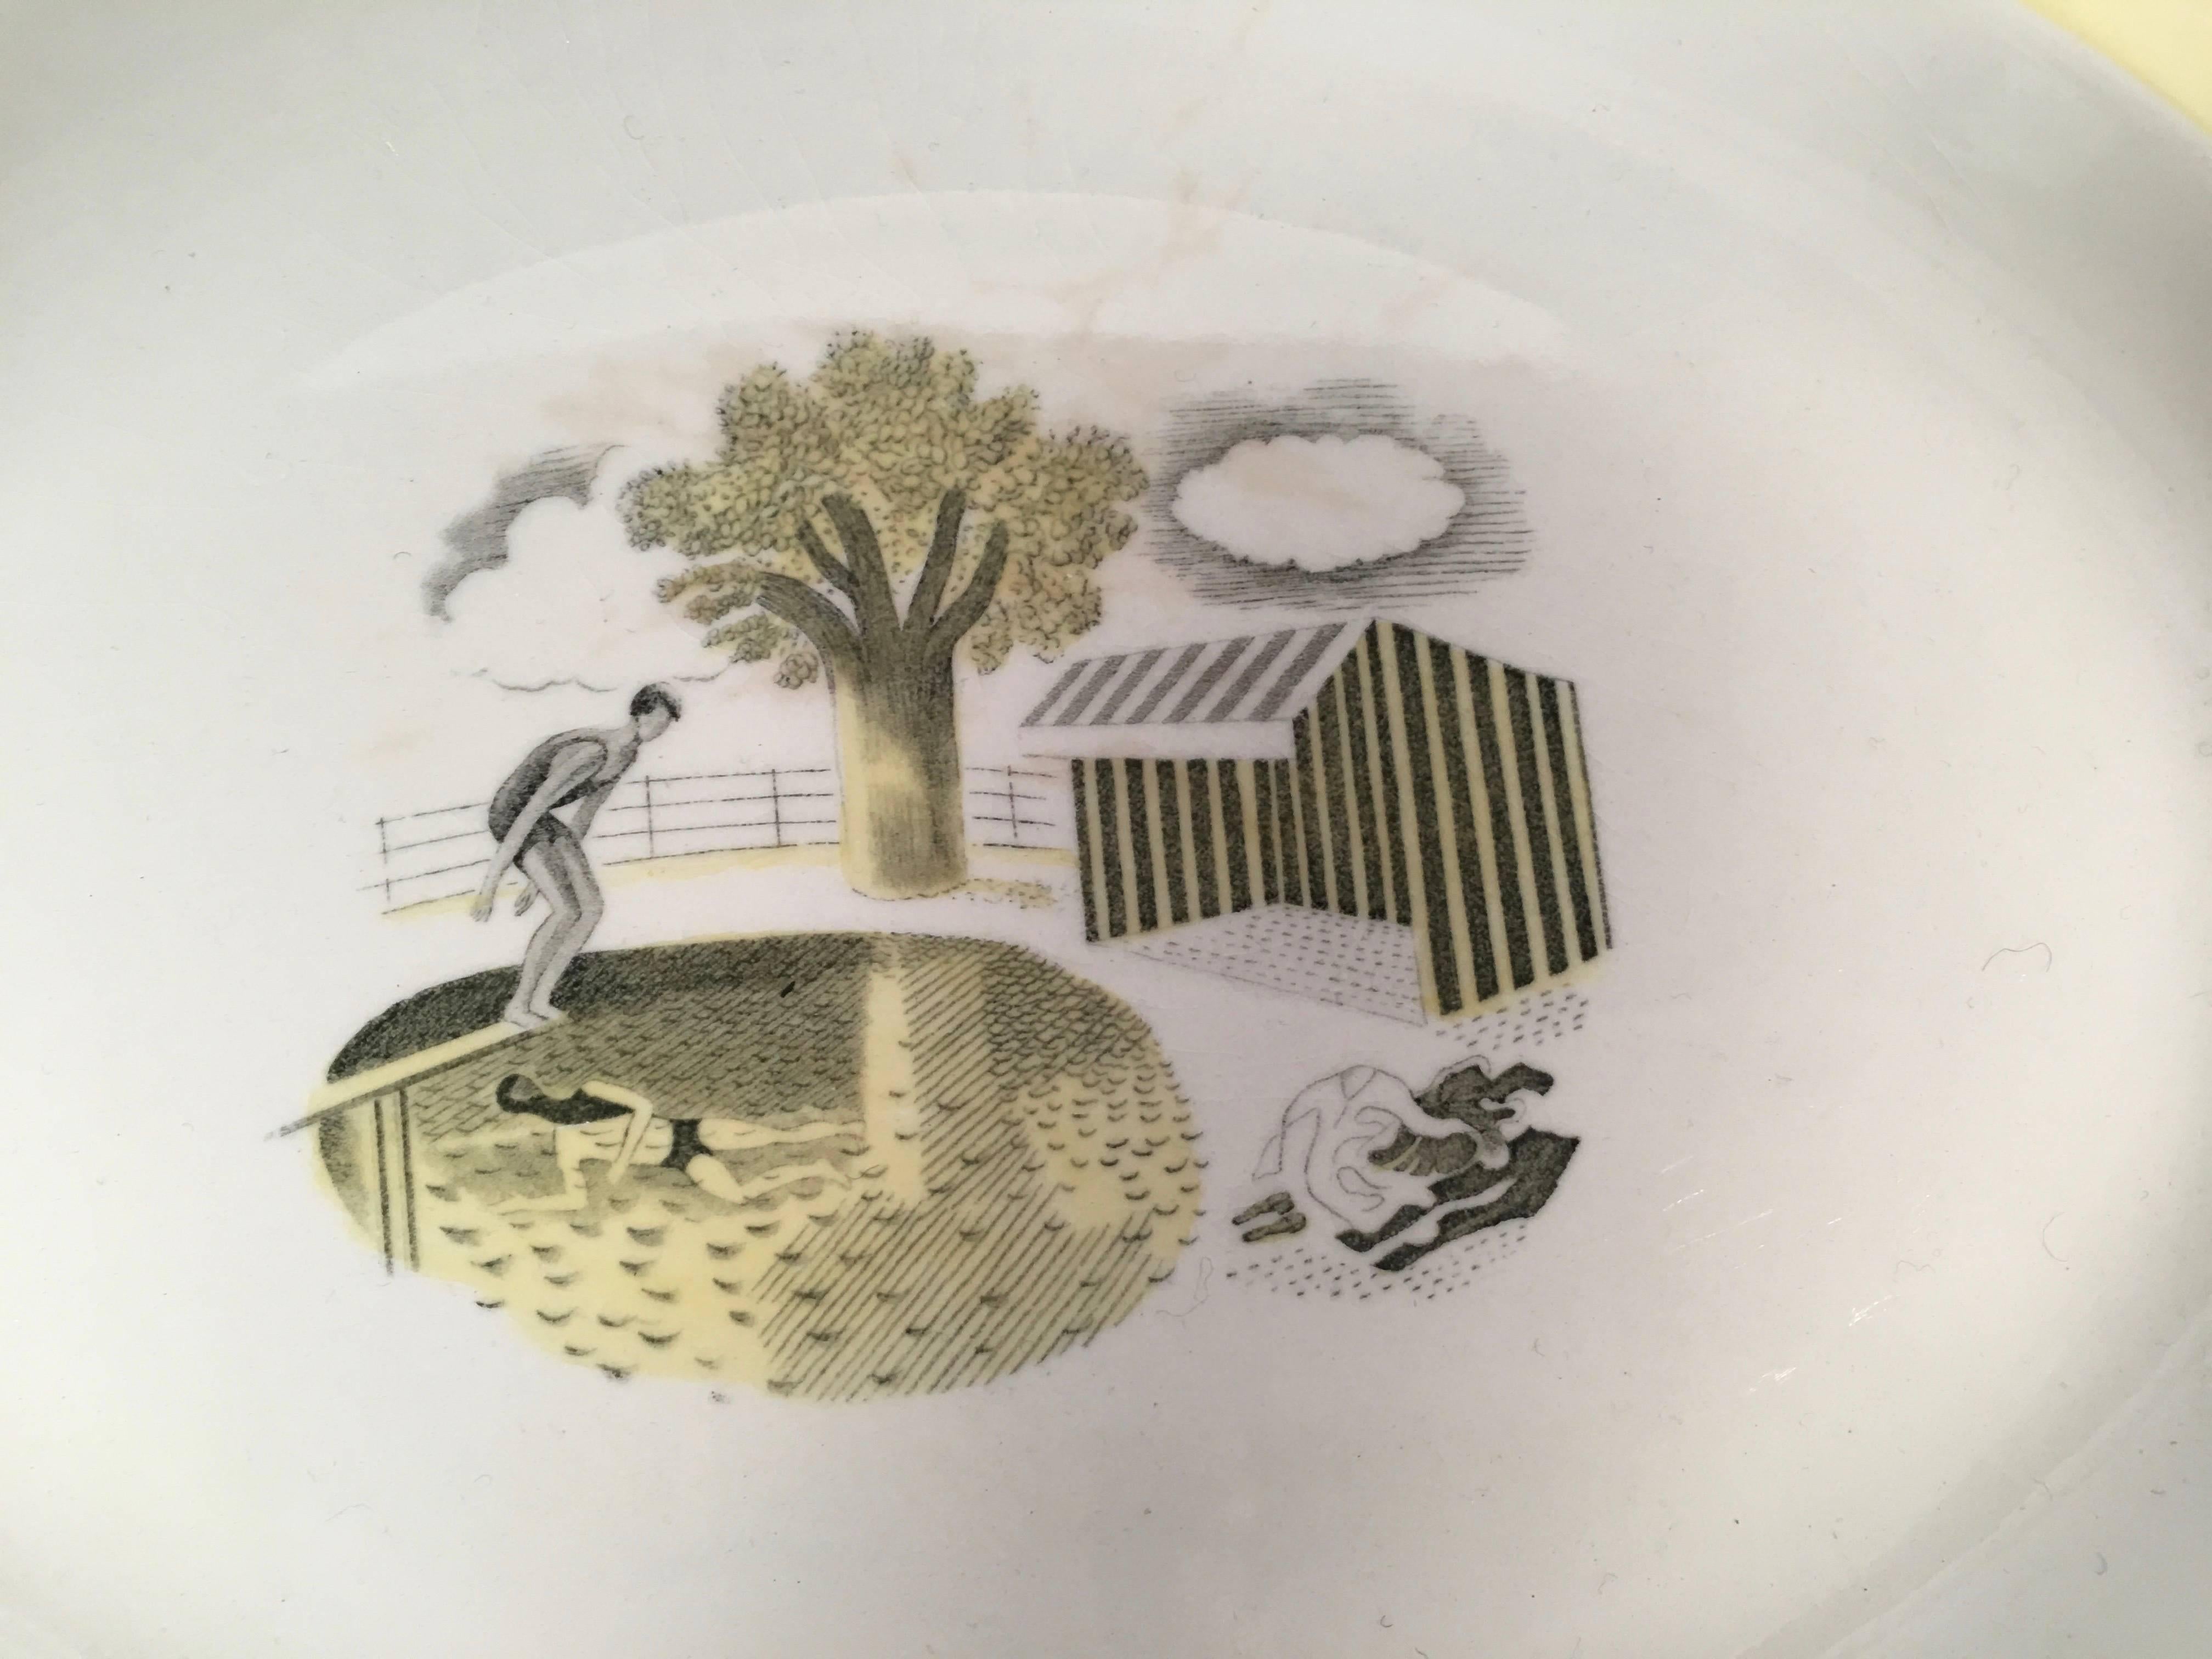 A rare Eric Ravilious designed oval platter for Wedgwood from the Garden Series, depicting a swimmer about to dive into a pool, above another swimmer who is underwater, next to a striped canvas cabana with their clothes nearby, in transfer printed